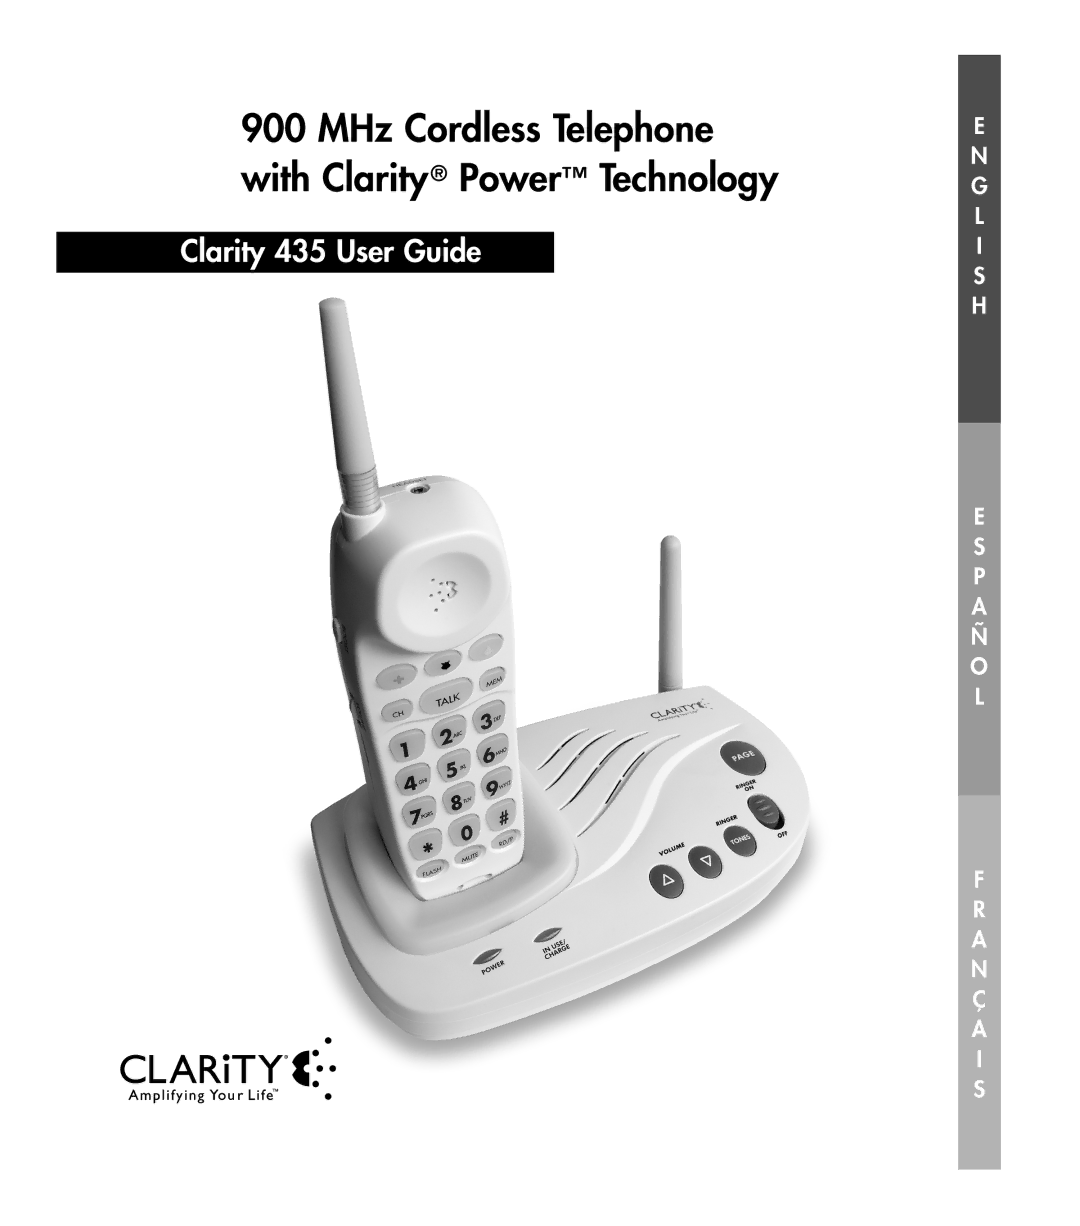 Clarity 435 manual MHz Cordless Telephone with Clarity Power Technology 